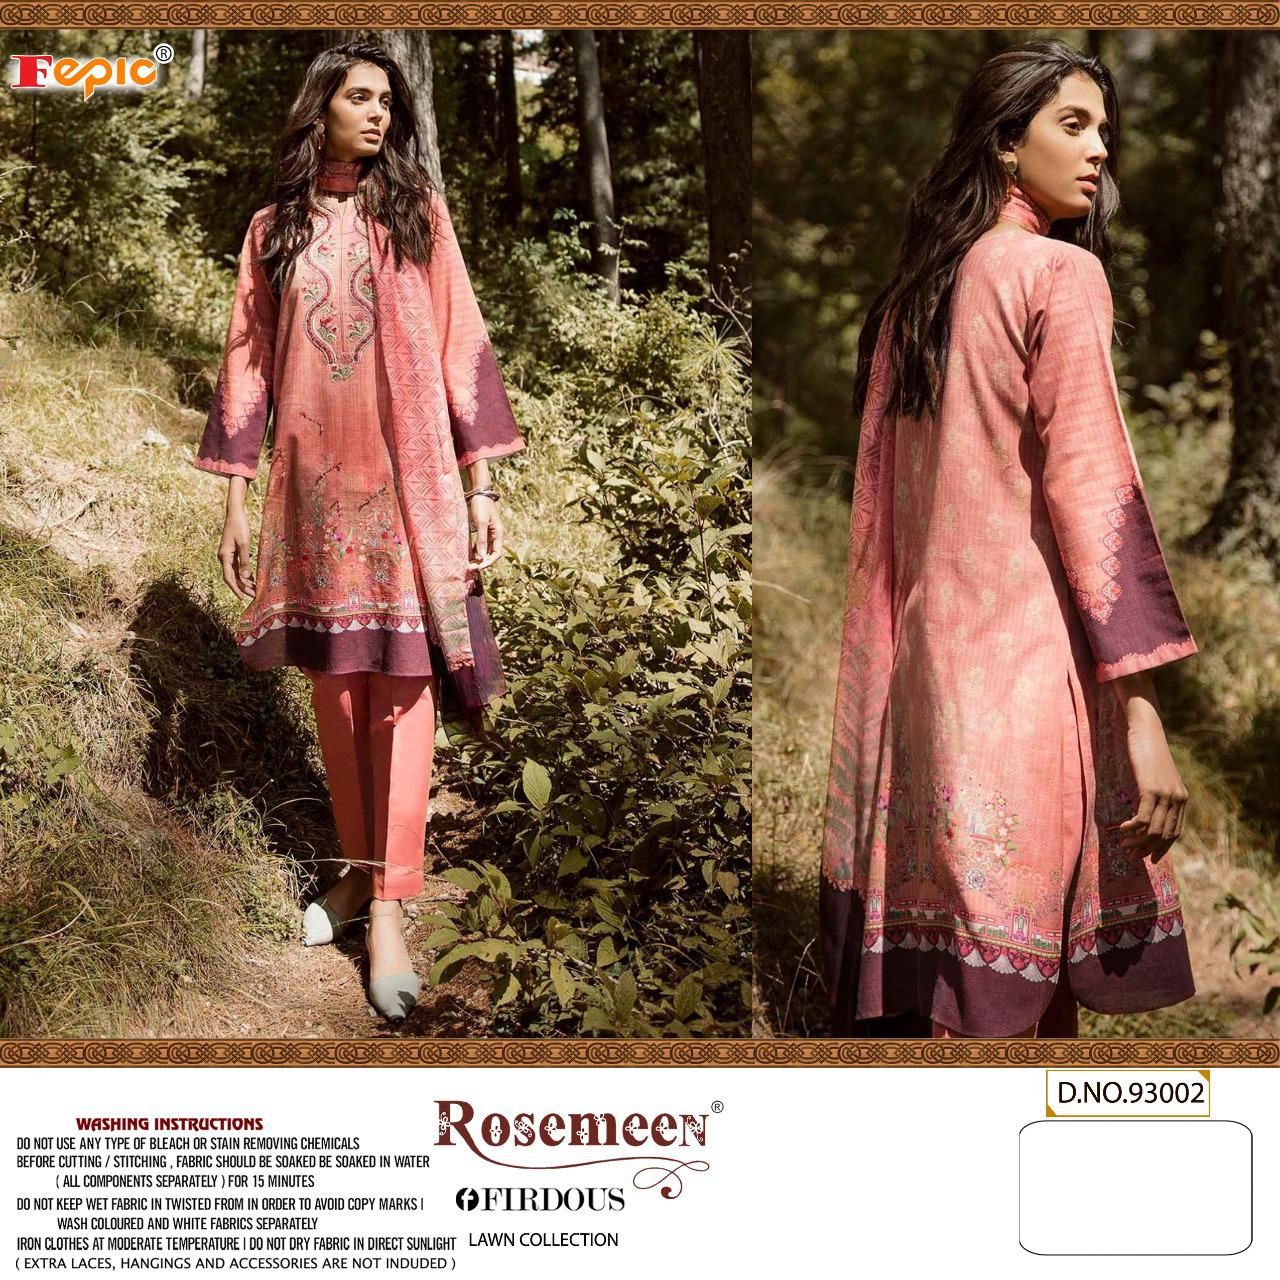 Fepic Rosemeen Firdous Lawn Collection 93002